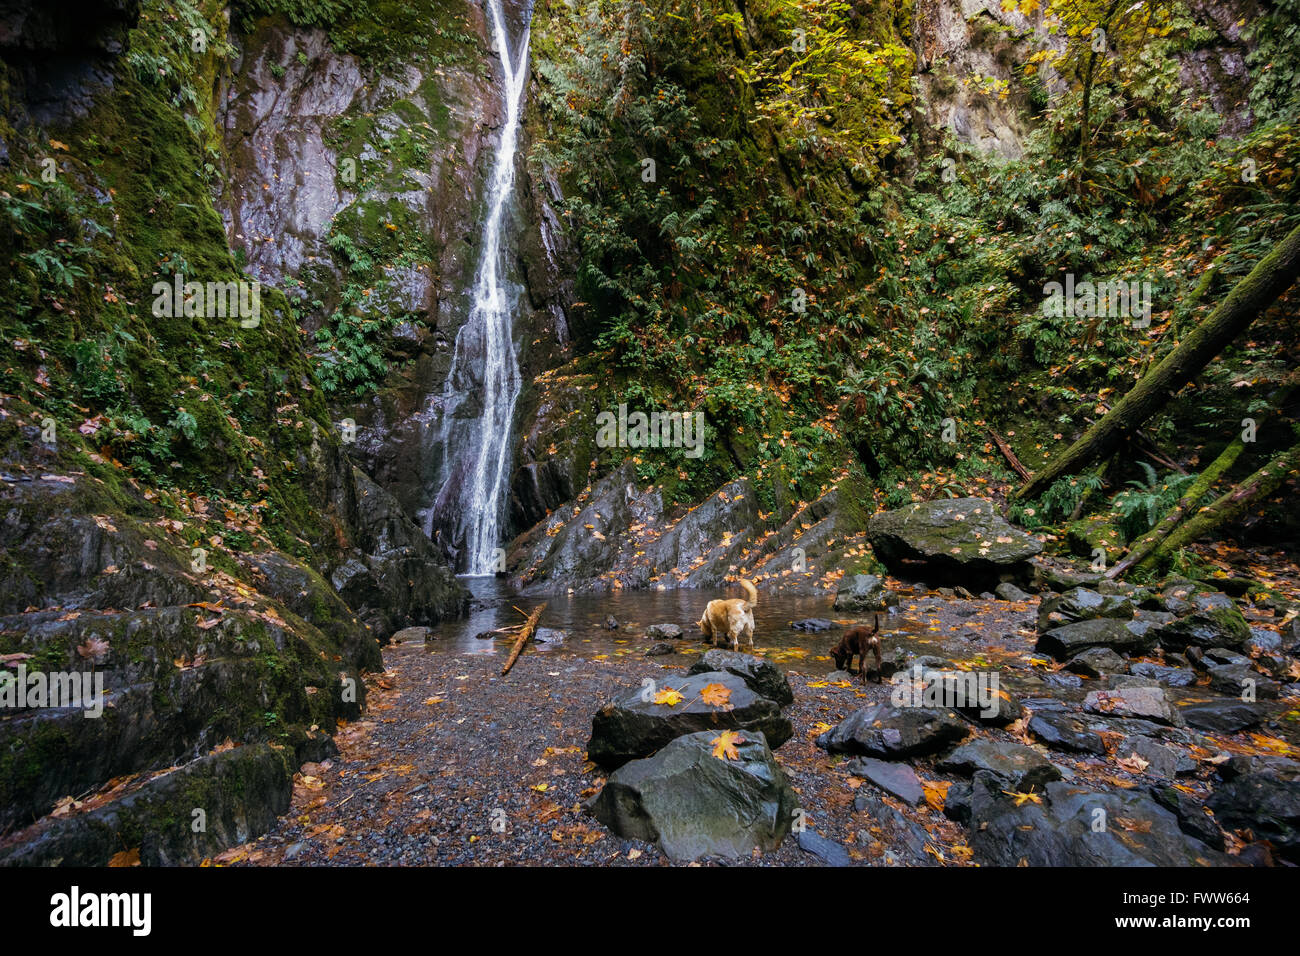 Two dogs take a drink at Niagara Falls in Goldstream Park, near Victoria, BC. Stock Photo